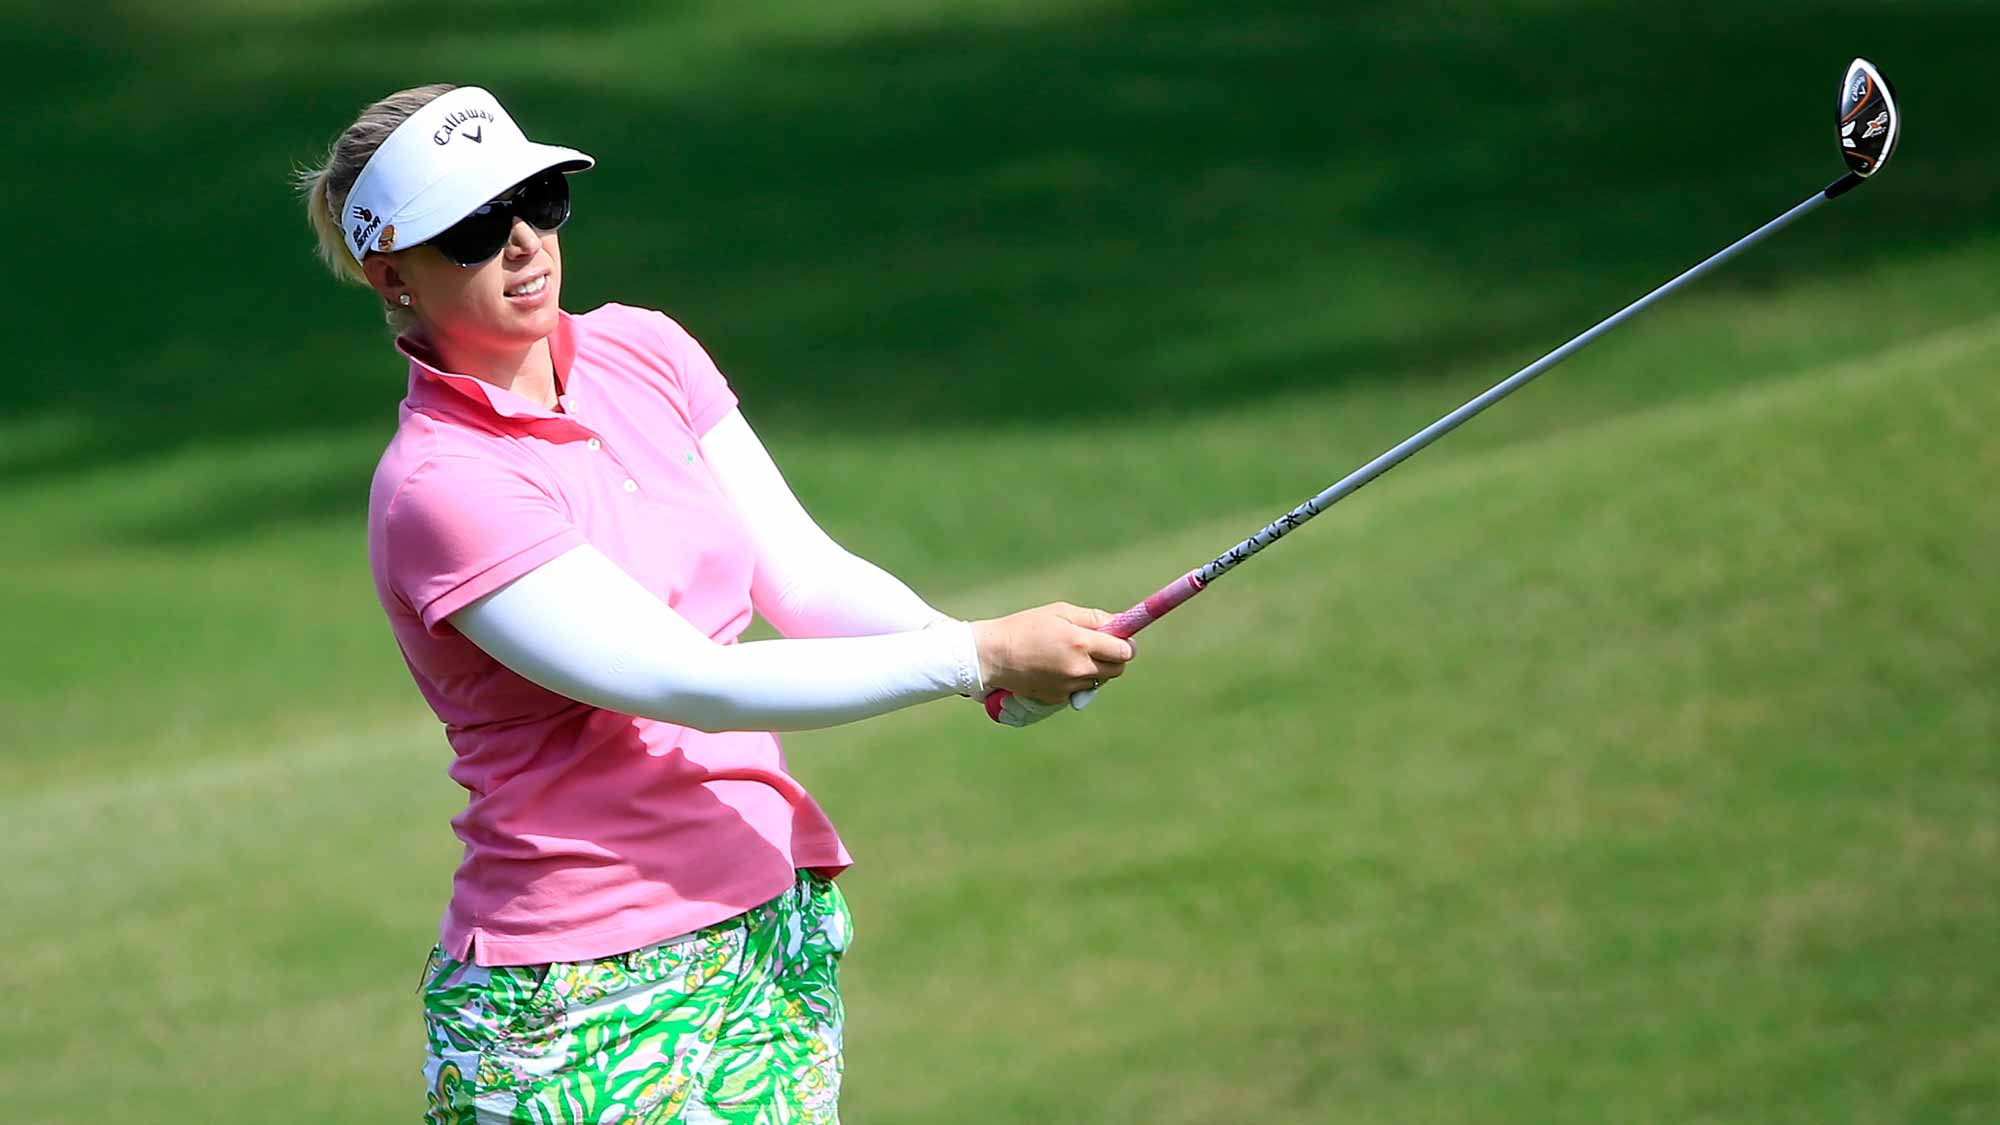 Morgan Pressel of the United States plays a shot on the seventh hole during the first round of the Walmart NW Arkansas Championship Presented by P&G at Pinnacle Country Club